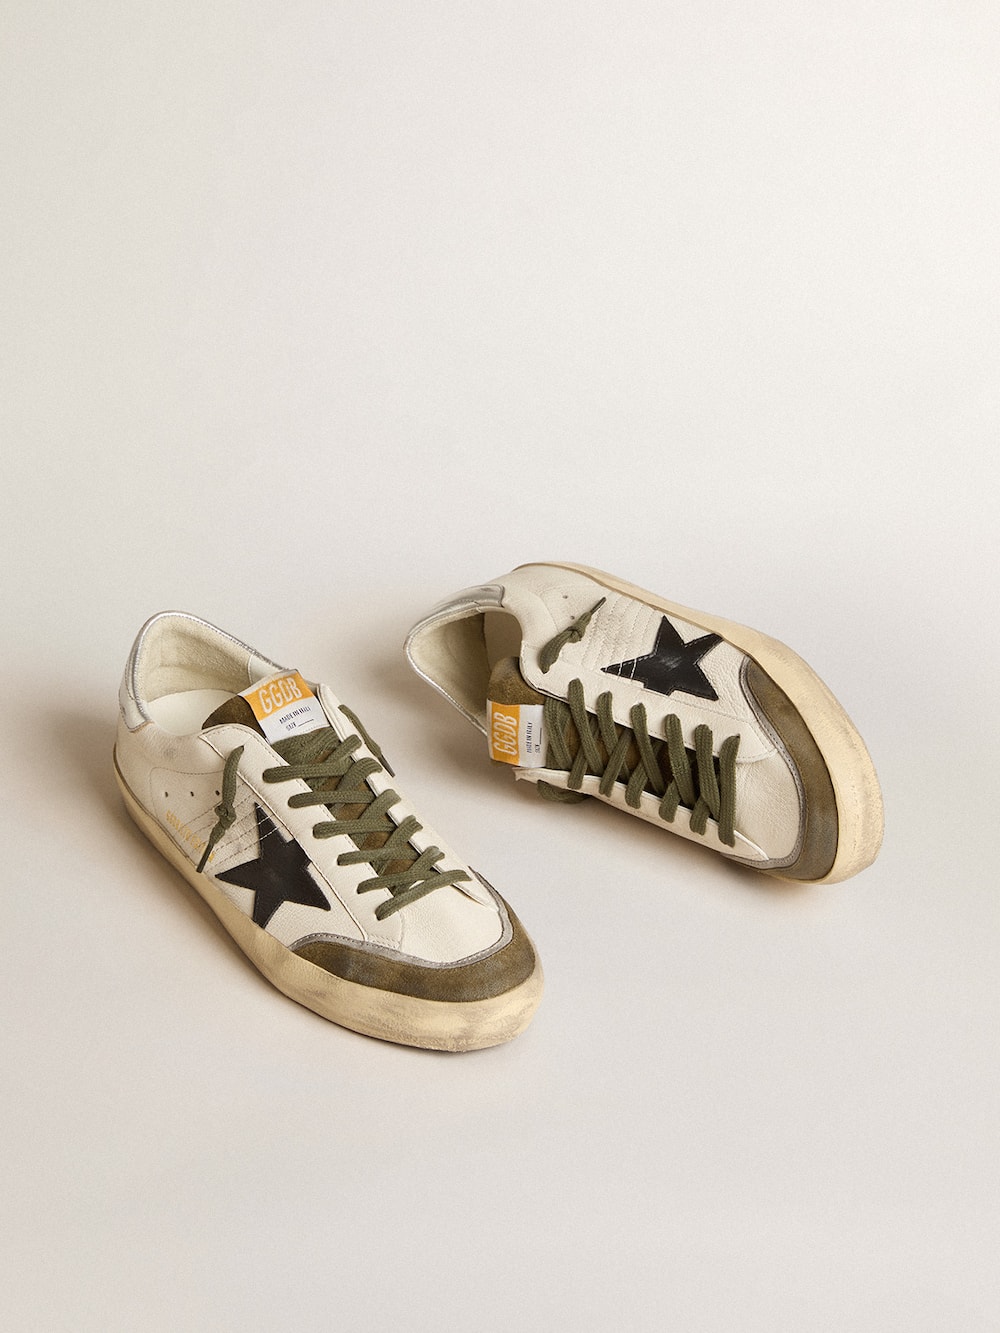 Golden Goose - Men's Super-Star LTD in nappa leather with black leather star and silver heel tab in 